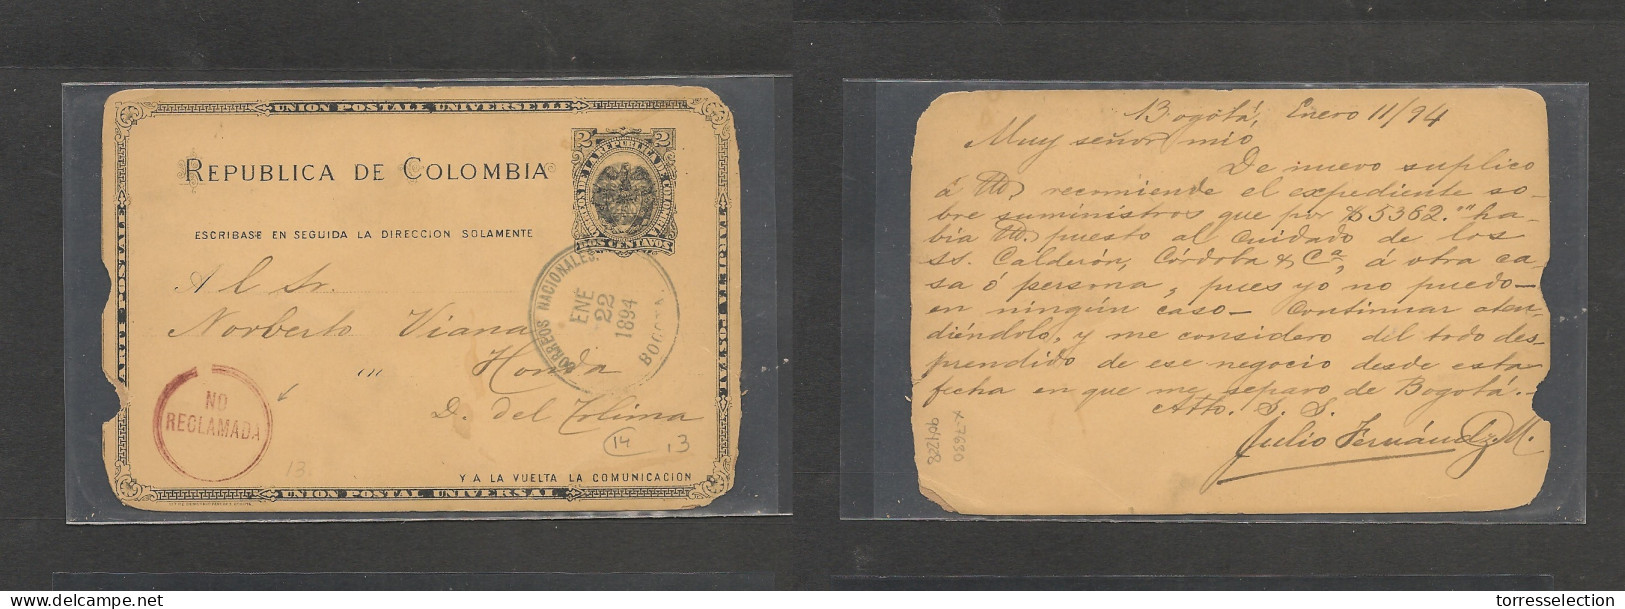 COLOMBIA. Colombia Cover - 1894 Bogota To Honda Stat Card With Rare Red NO RECLAMADA Special Cachet Rarity - Colombia